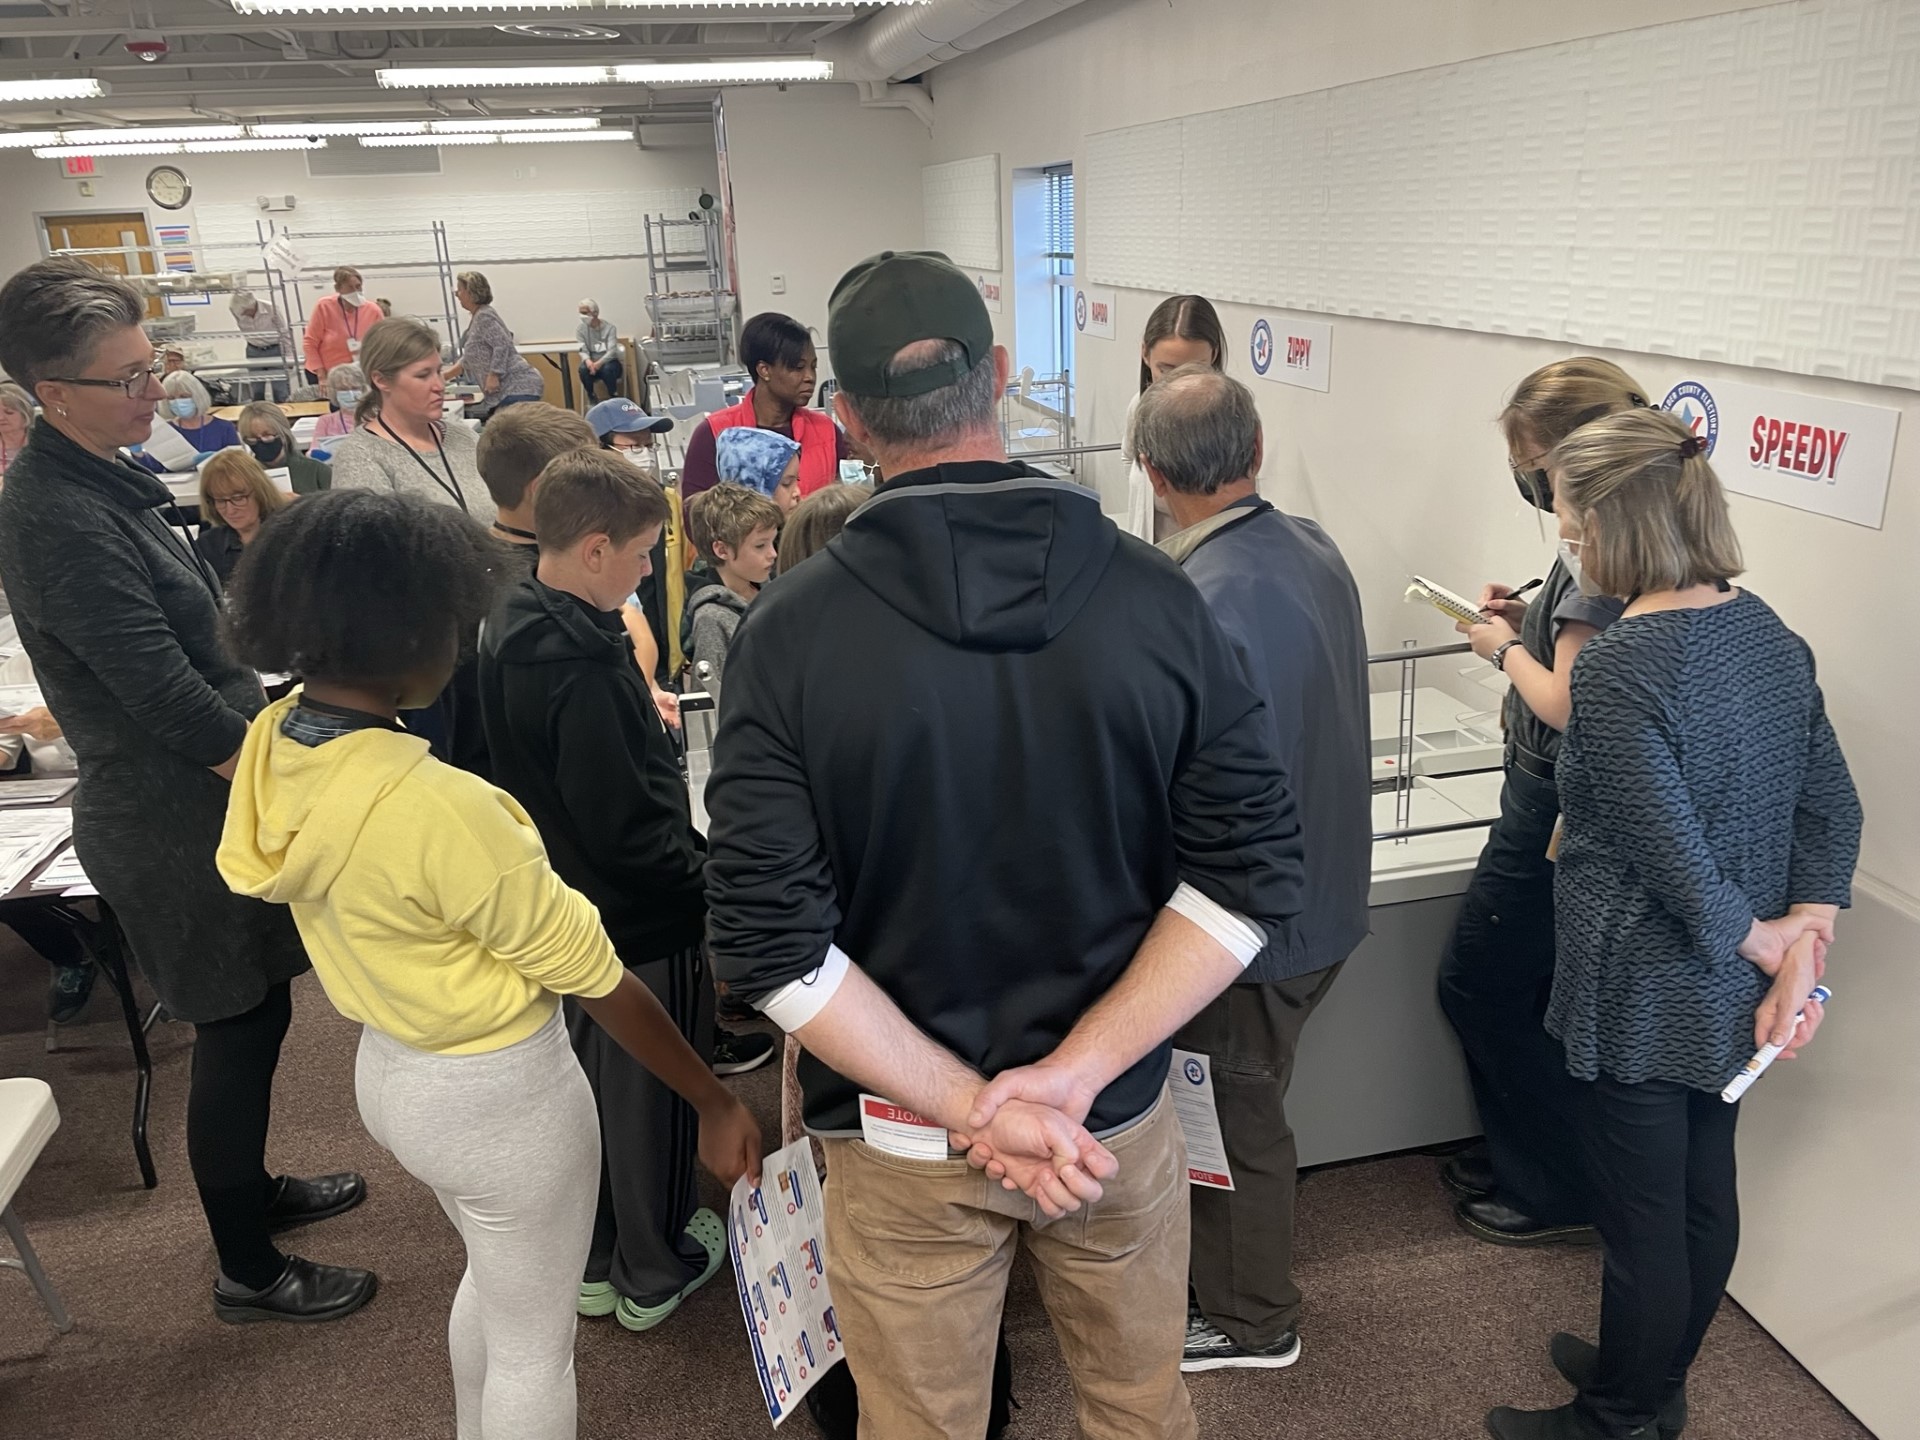 People on an election facility tour